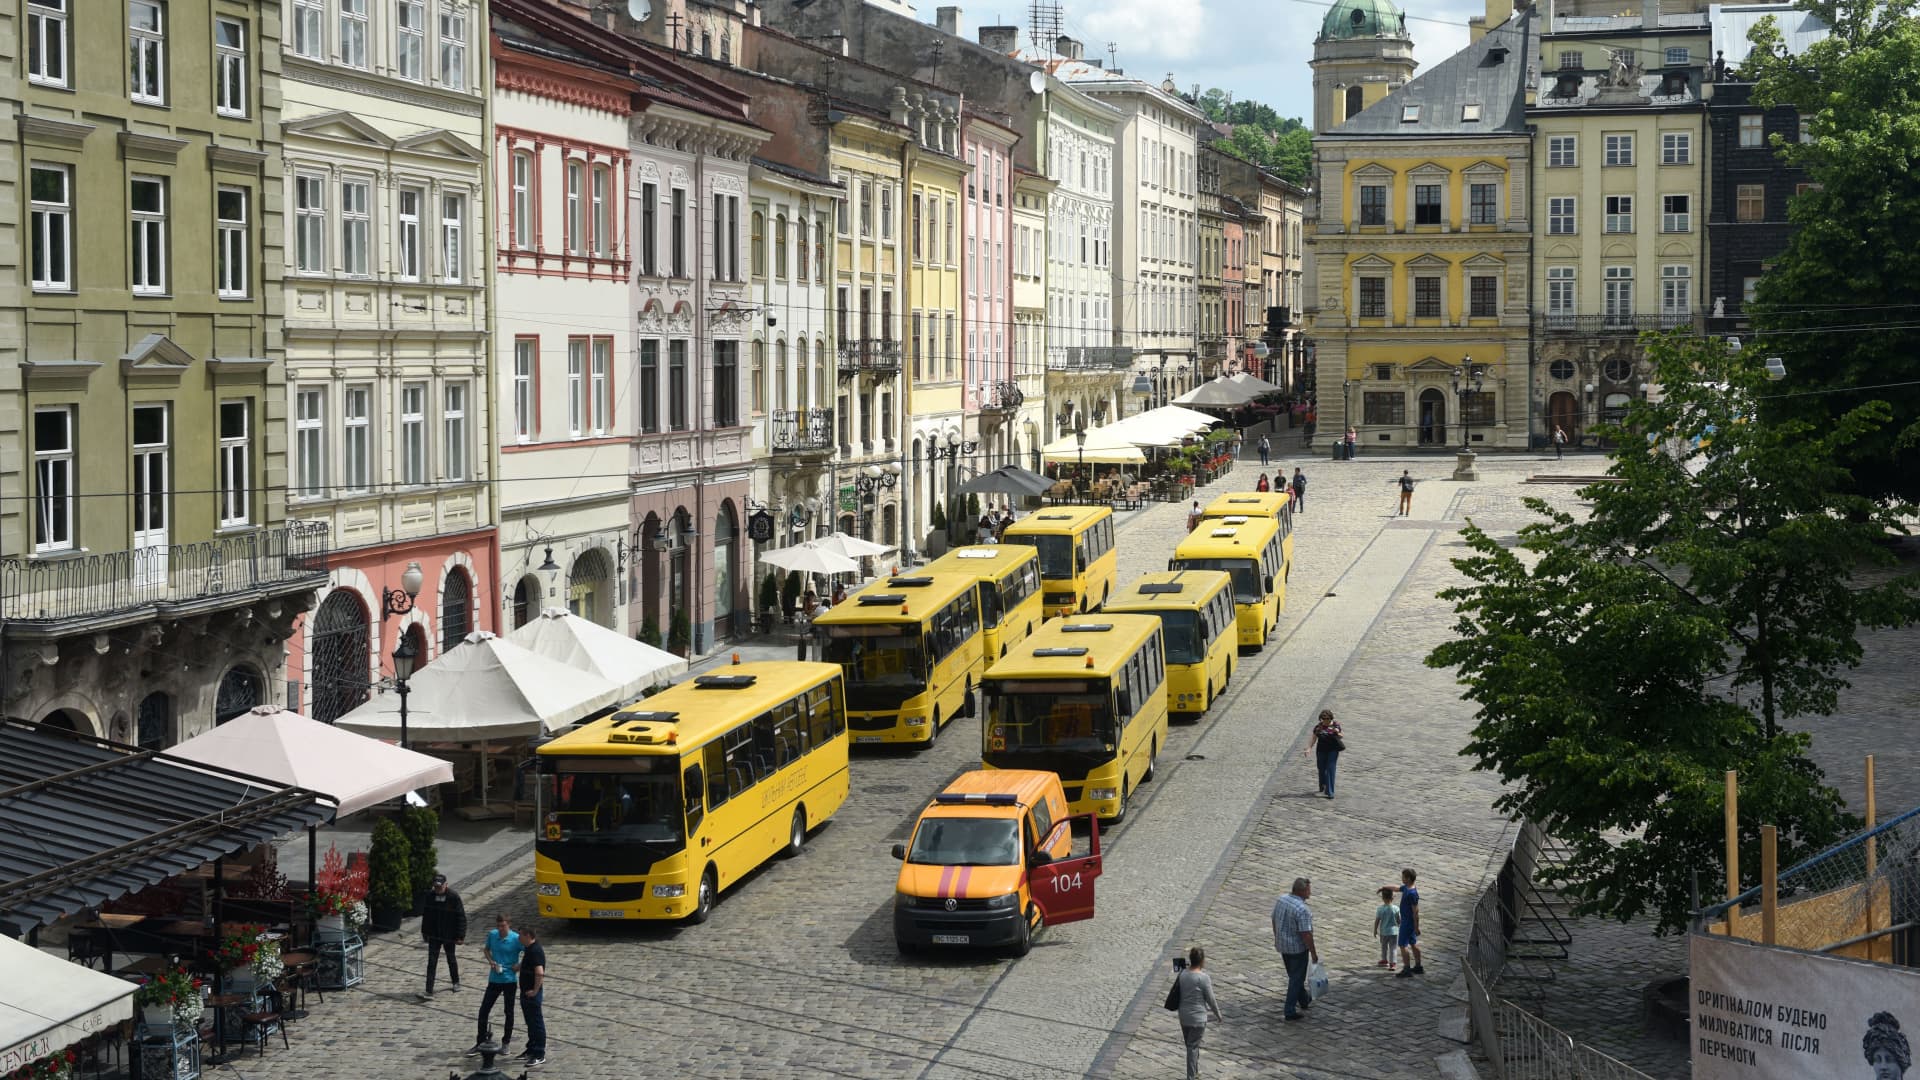 A general view shows empty yellow school busses where stuffed toys symbolizing each of 243 killed Ukrainian children are displayed on seats during an action marking the International Children's Day, in Lviv on June 1, 2022, amid the Russian invasion of Ukraine.